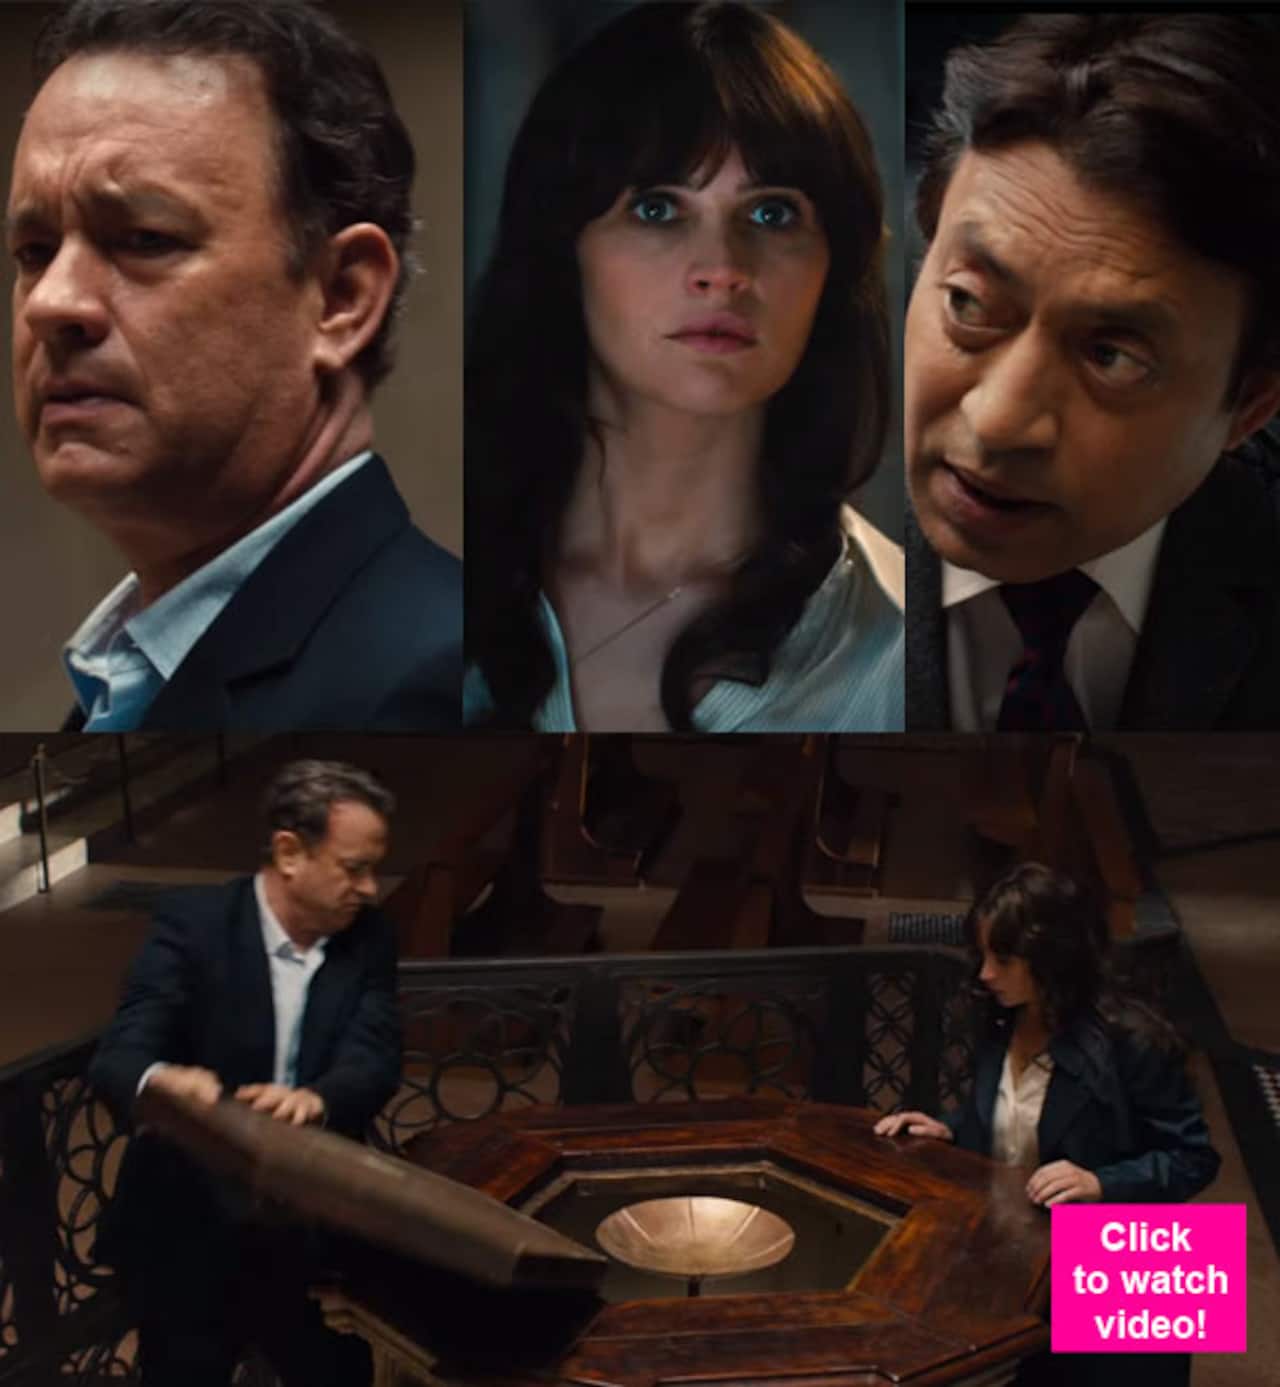 Inferno teaser: Tom Hanks' Robert Langdon is humanity's last hope, while Irrfan Khan wants to stop him in this AWESOME promo!